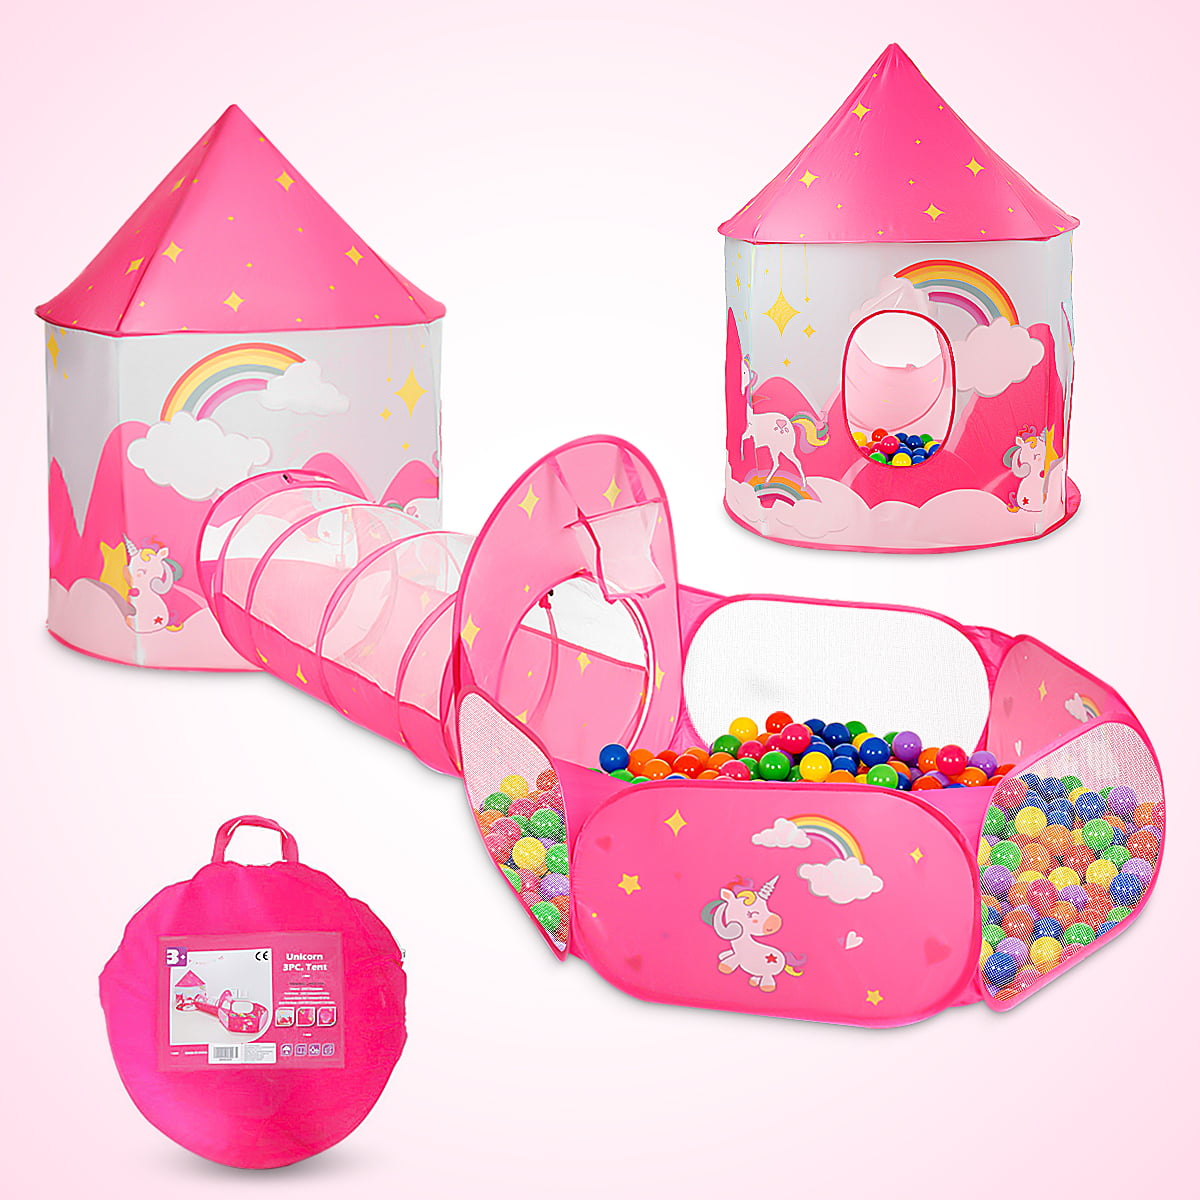 Baby Girls Princess Castle Play Tent Fairy Tale Pink Prairie Foldable Play House 